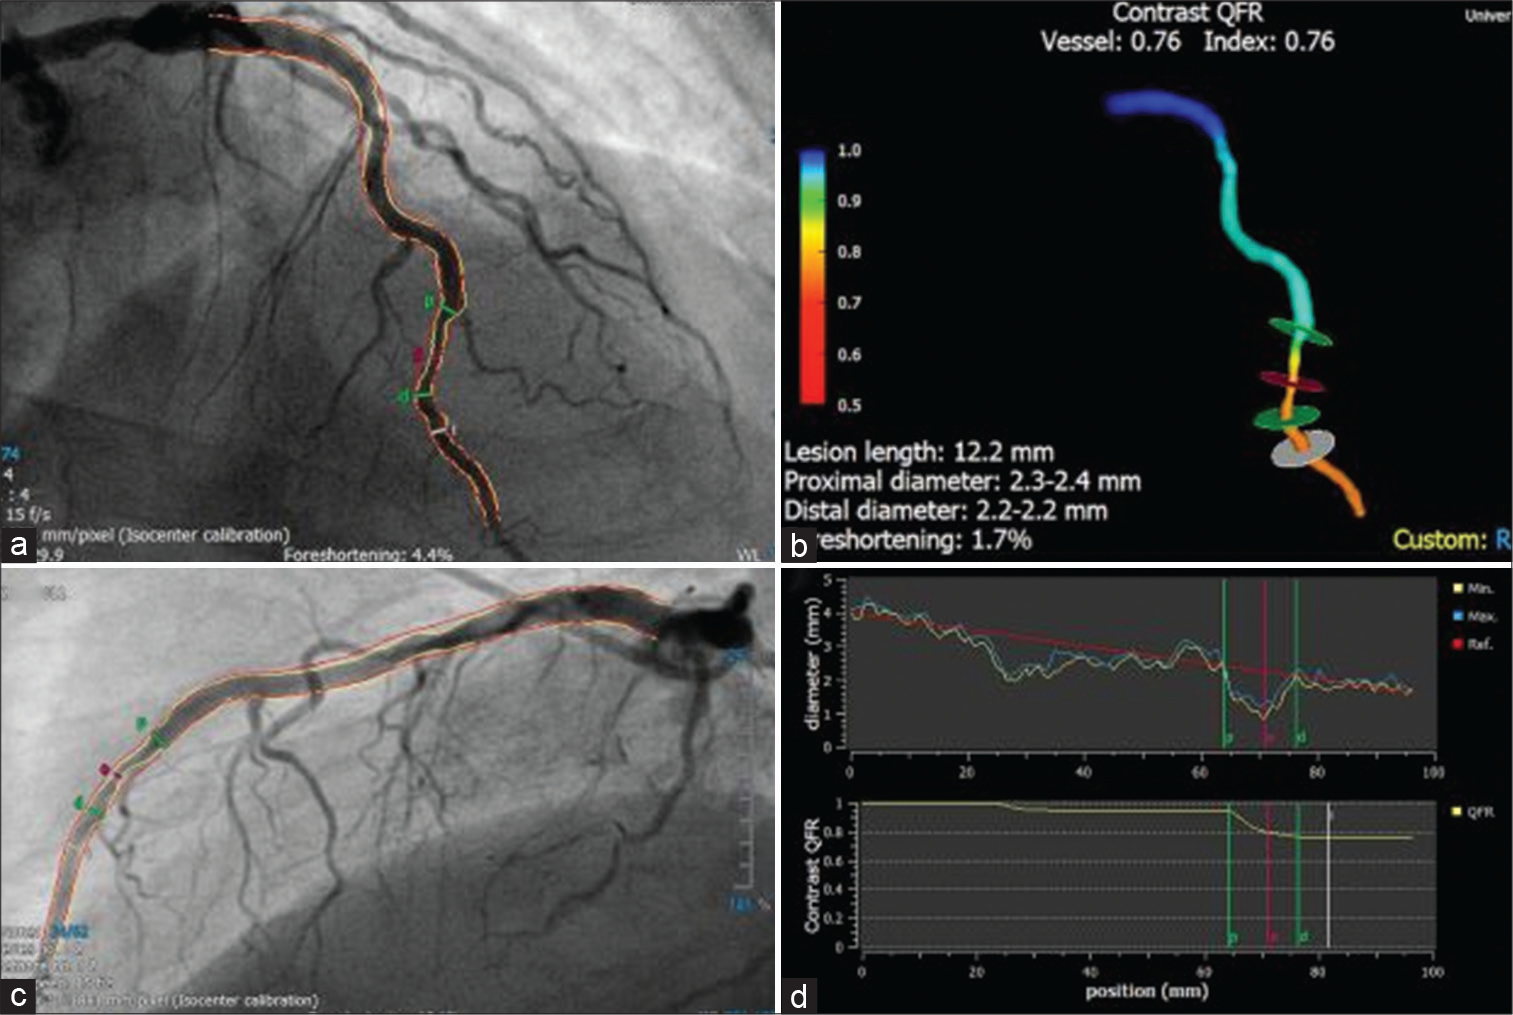 Quantitative flow ratio (QFR) analysis (Courtesy of Xu et al.). An illustration of how angiography might have missed a revascularization signal in the left anterior descending artery, that was significant on QFR with value of 0.76. Here are some pictures showing the vessel’s diameter and QFR curves as measured along its length: (a and b) two angiographic projections separated by a 25° angle; (c) a 3D reconstruction of the vessel; and (d) vessel diameter, and QFR curves over the length of the vessel.